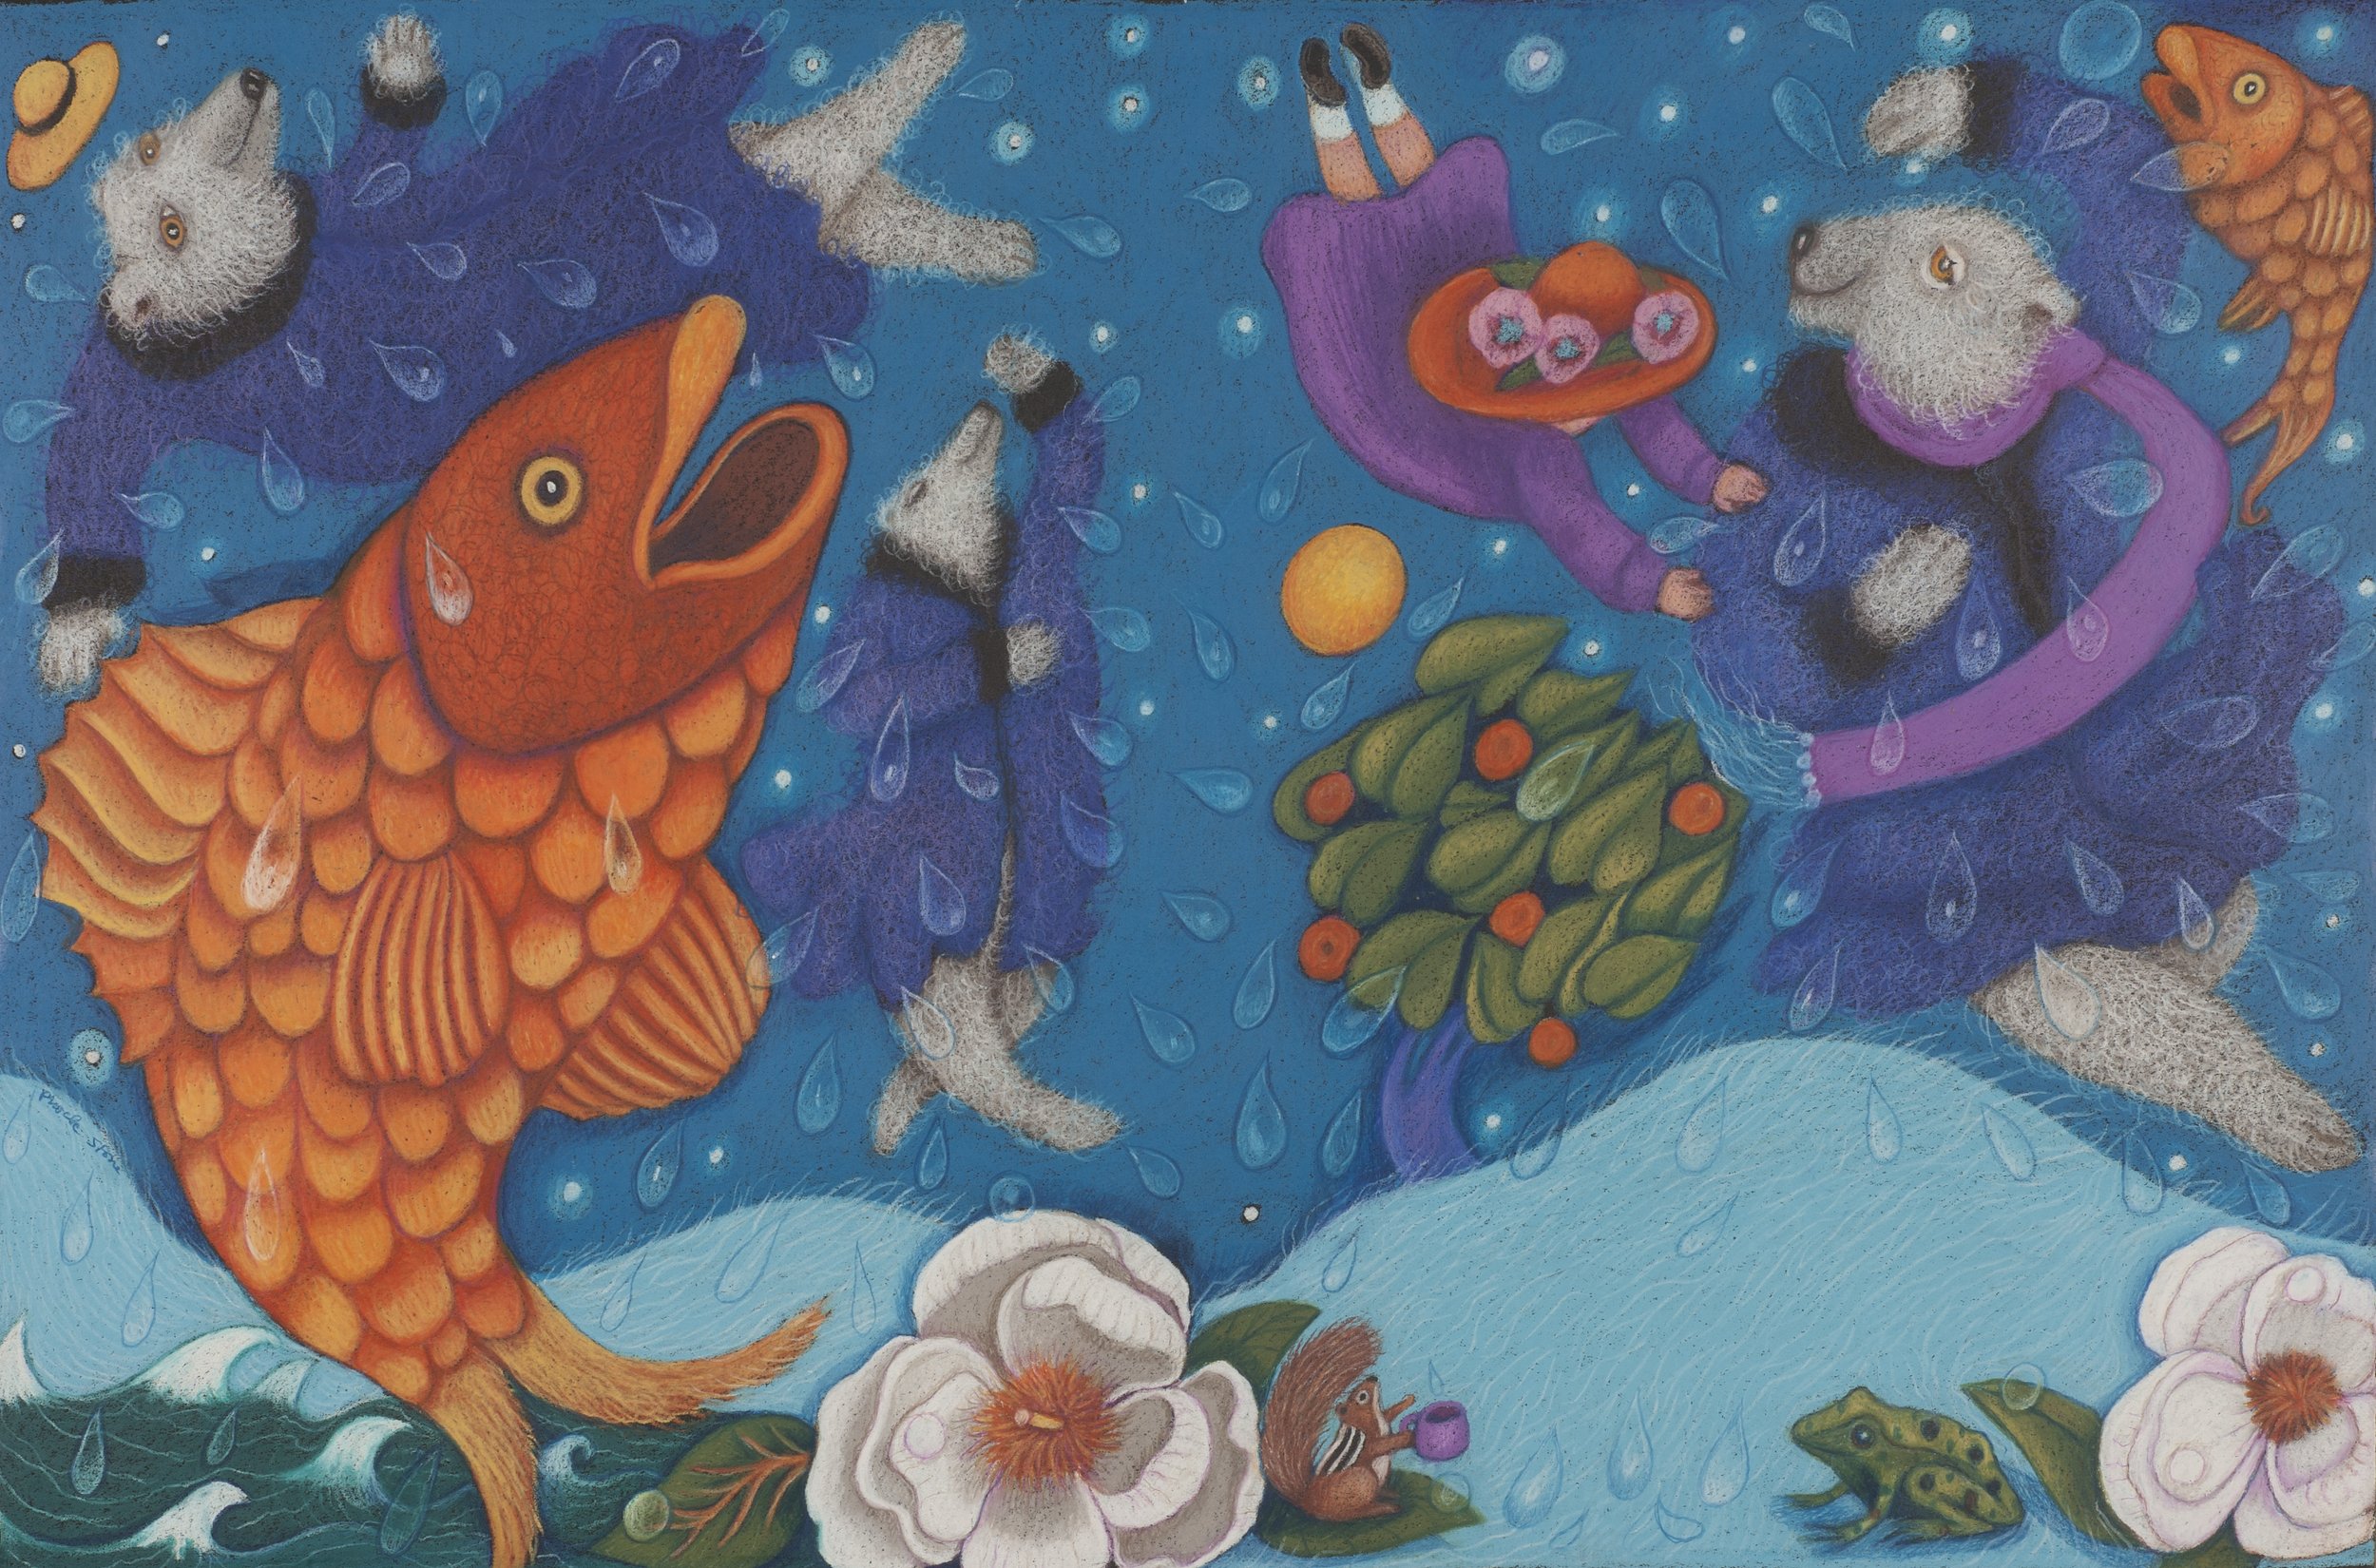 Phoebe Stone; "Fish Leap from the Water," 1997; Pastel; From "When the Wind Bears Go Dancing"